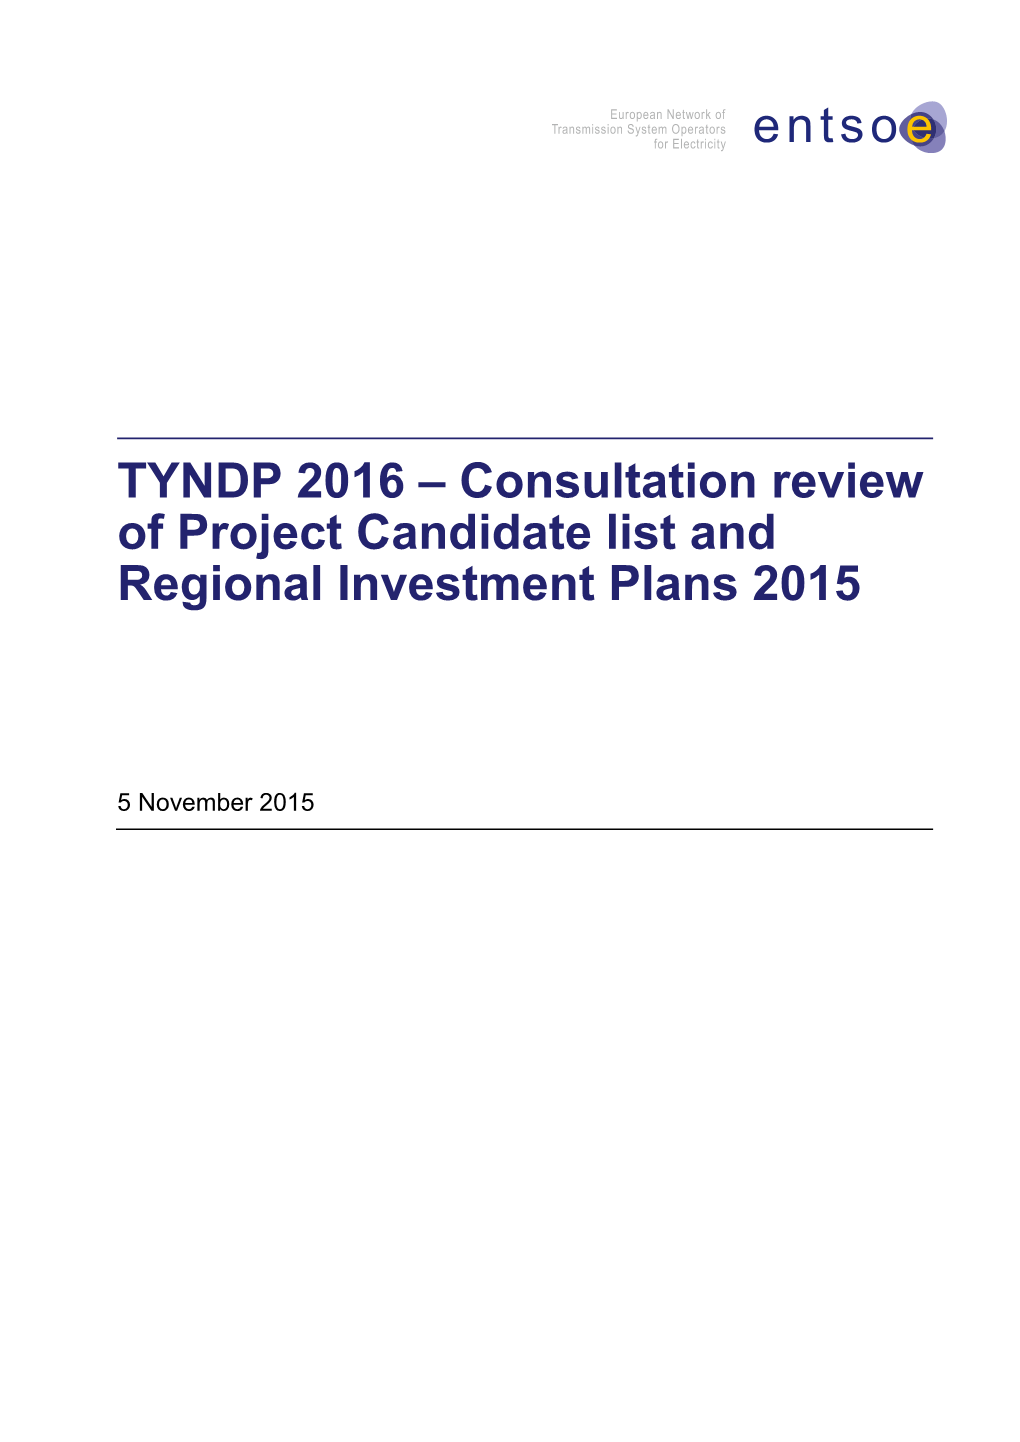 TYNDP 2016 – Consultation Review of Project Candidate List and Regional Investment Plans 2015